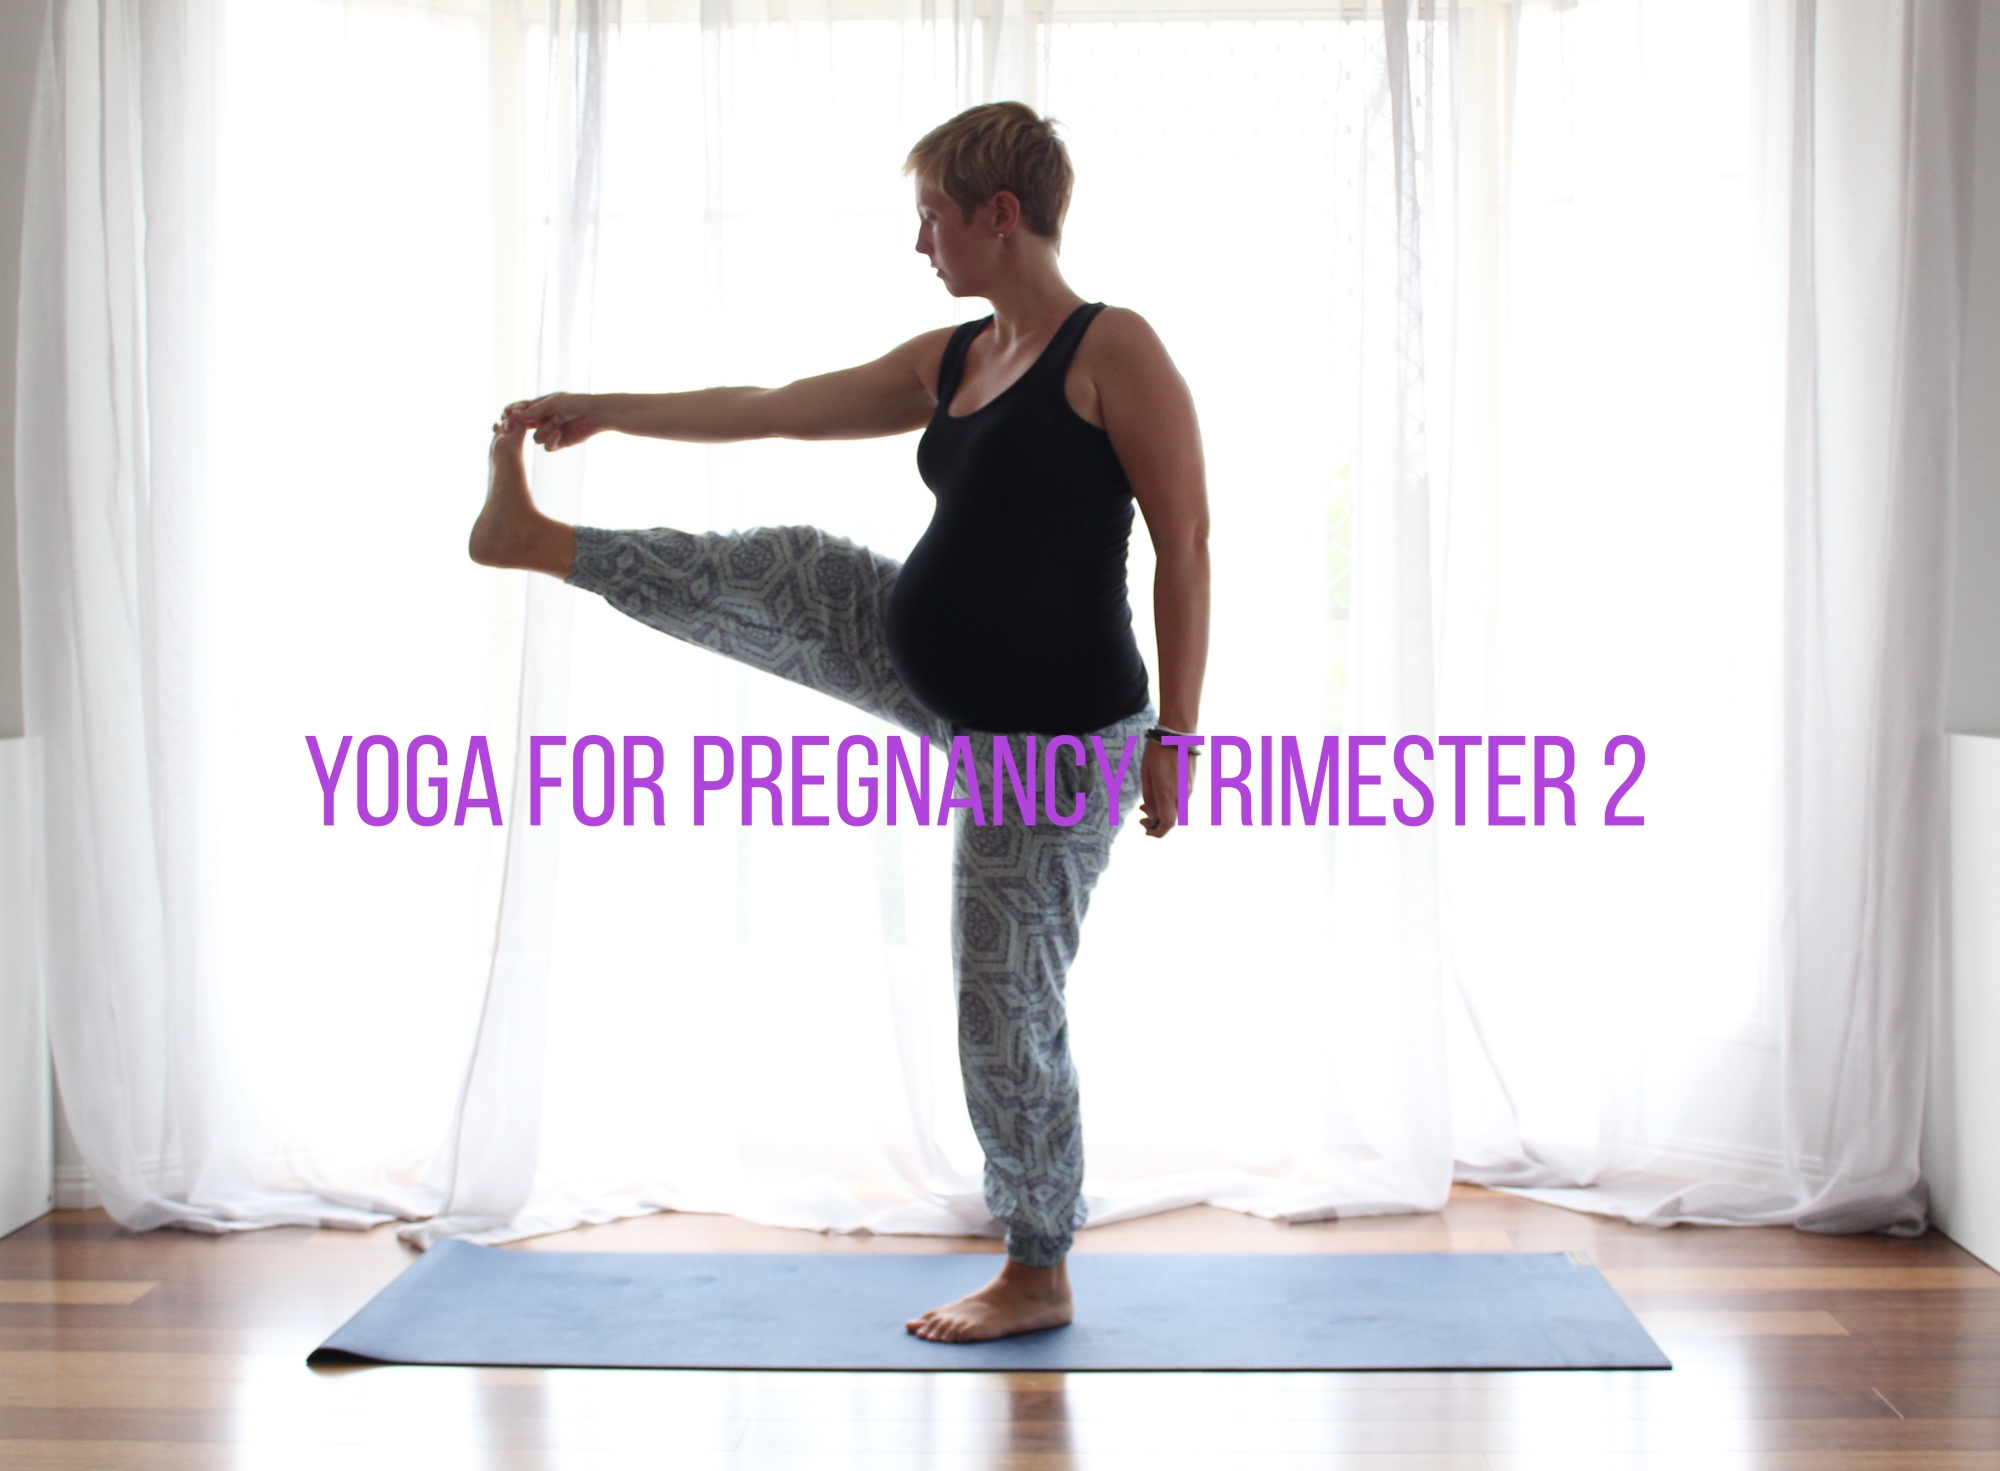 Prenatal Yoga - Learn Yoga for Pregnant Lady for Each Trimester | Cult.fit